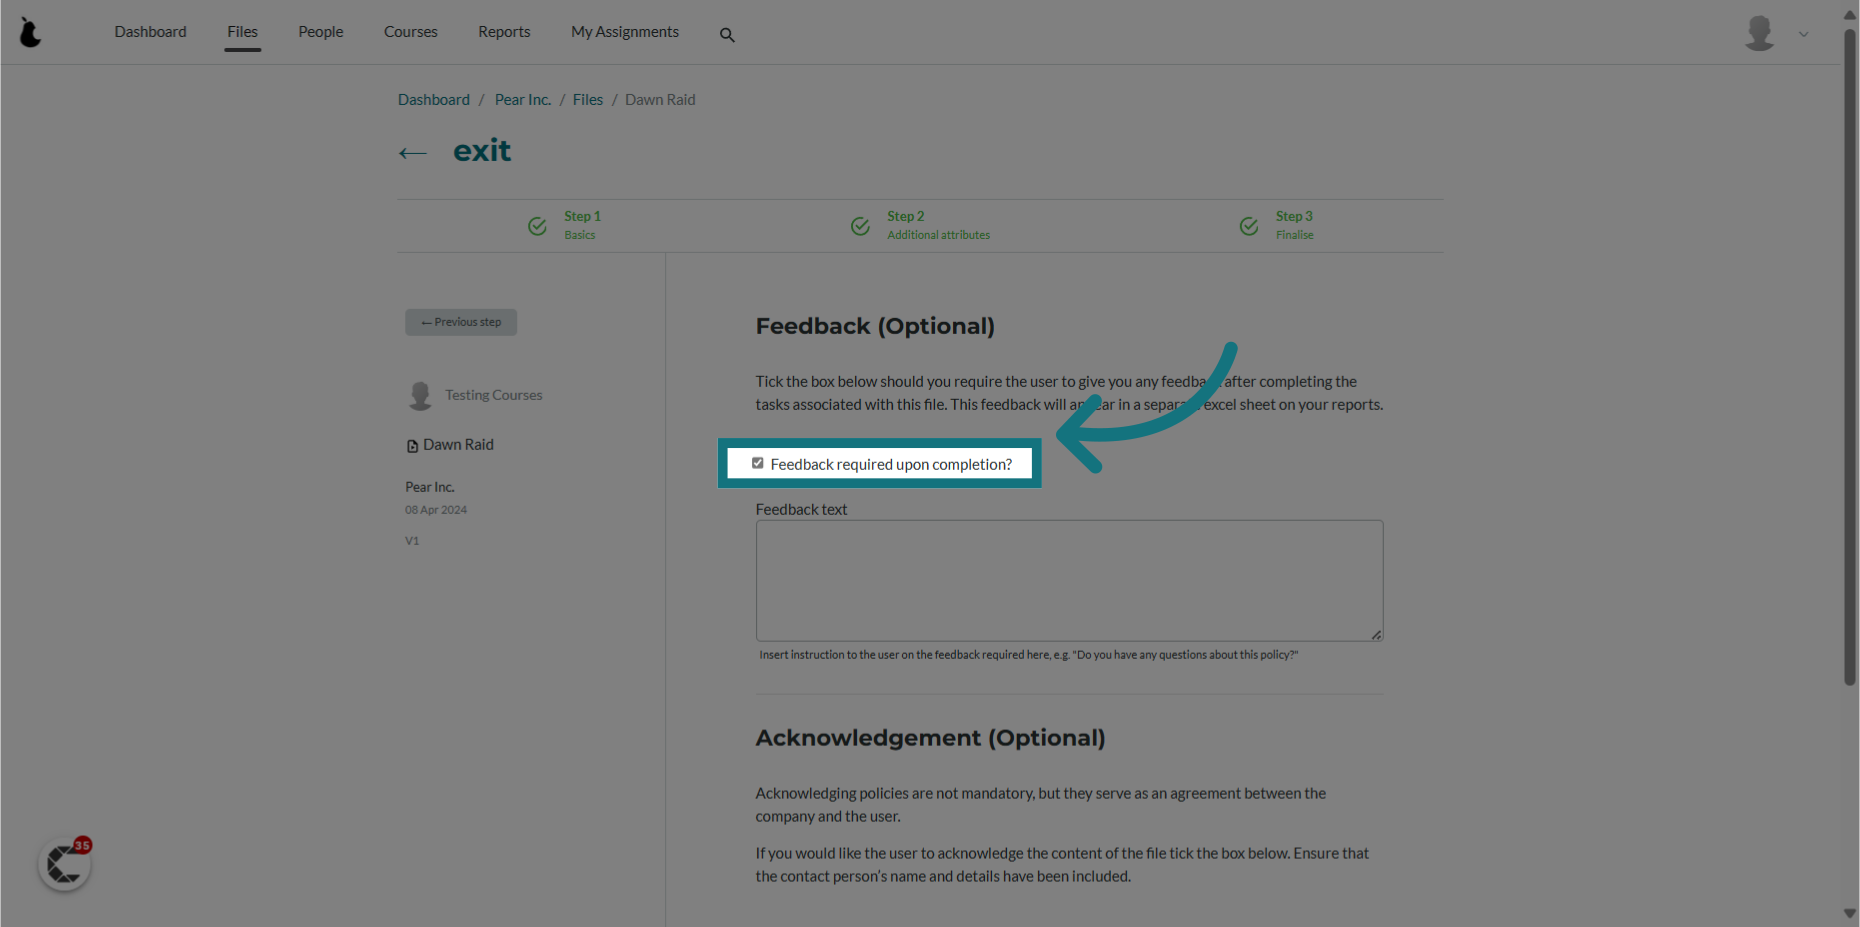 Optionally, enable employees to provide feedback on the file